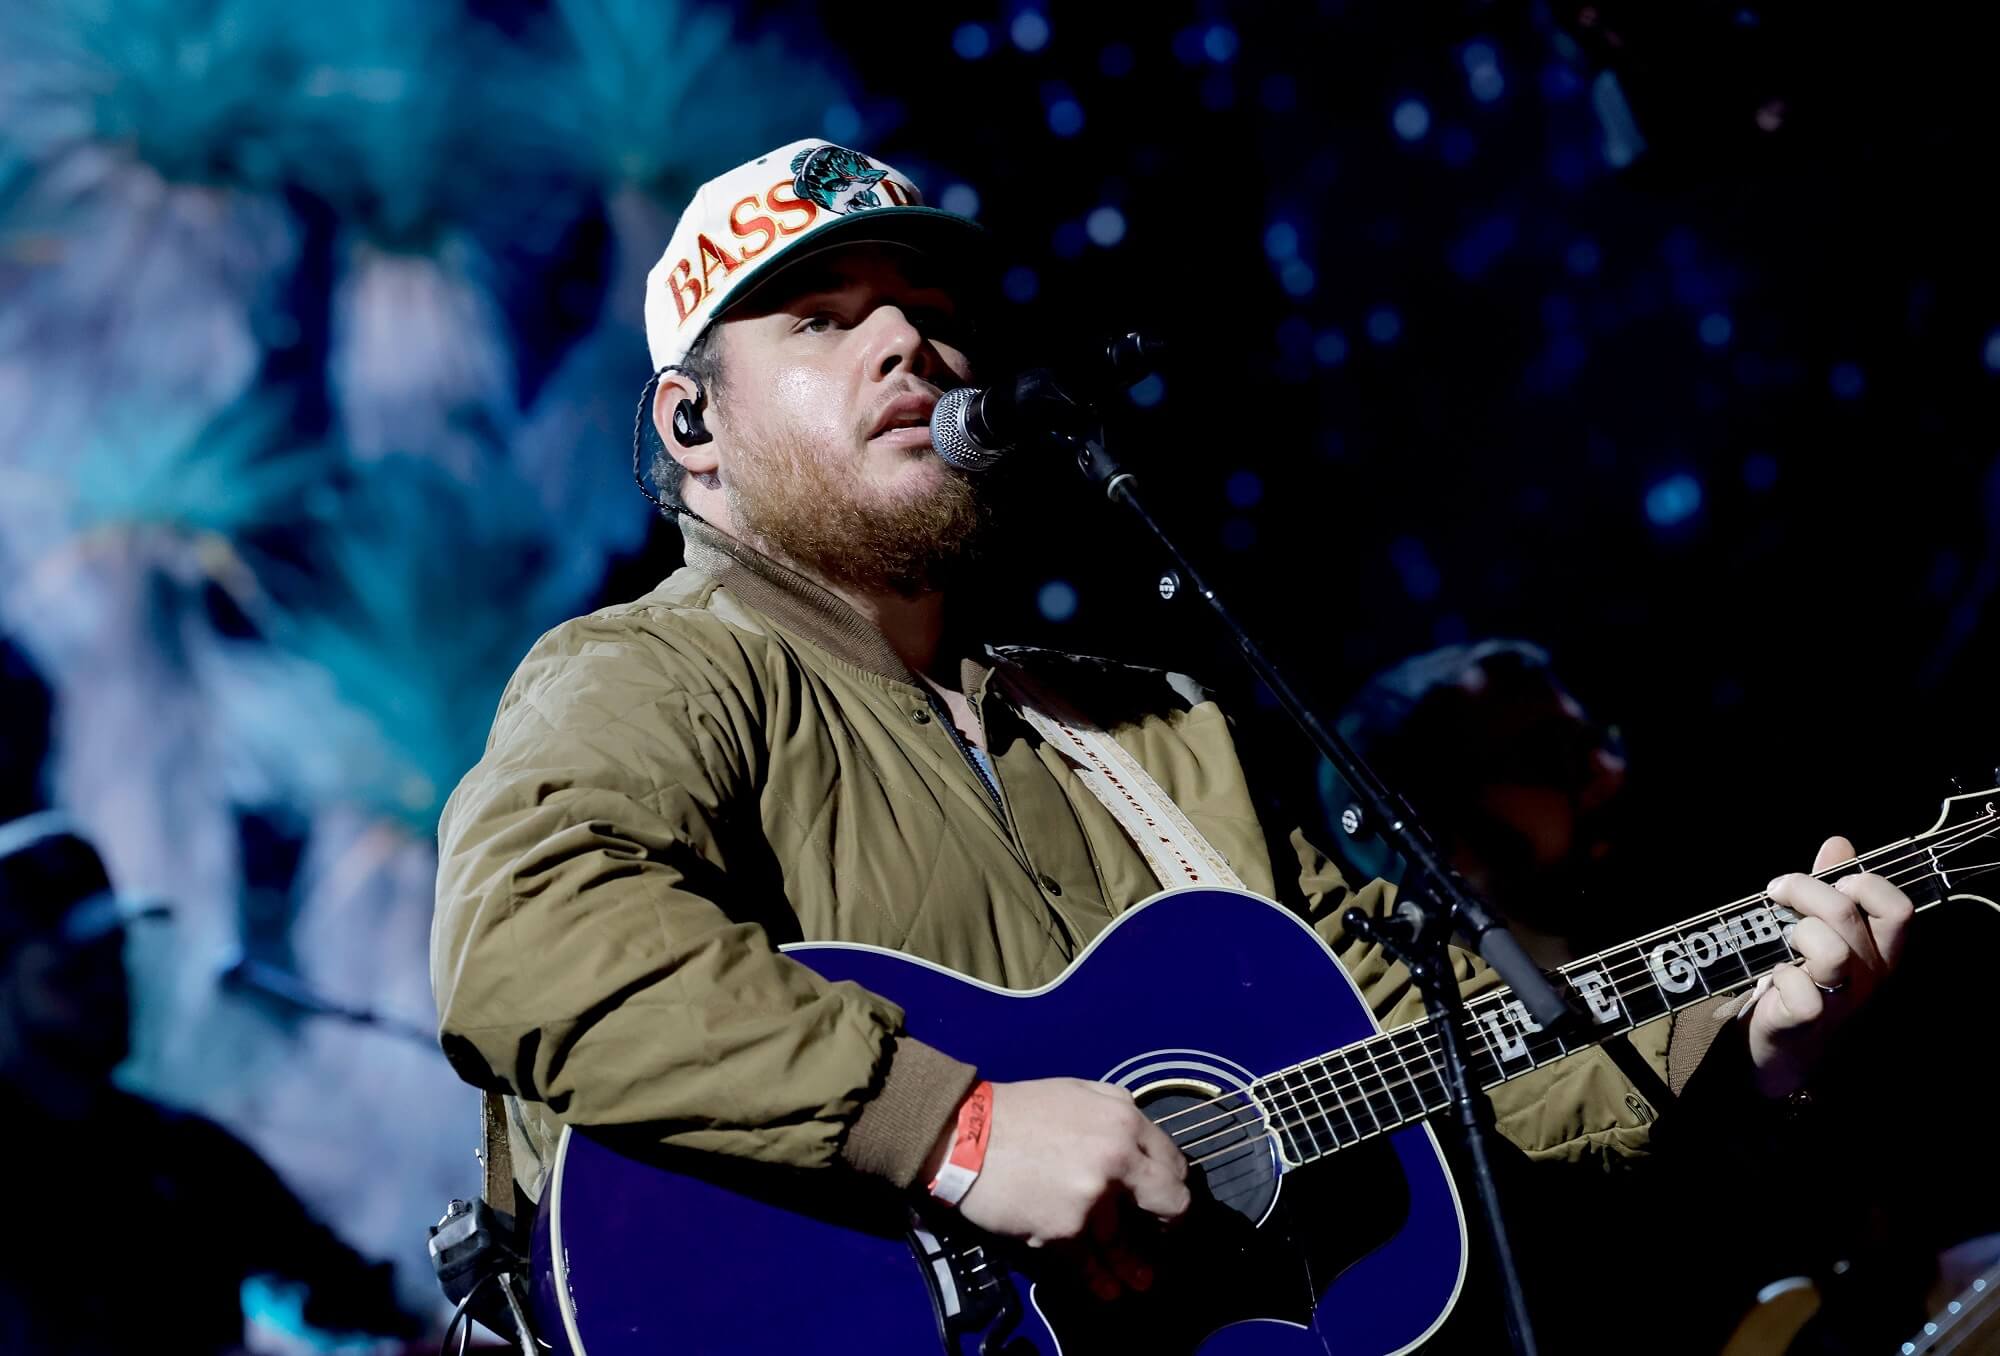 Luke Combs sings into a microphone while playing a blue acoustic guitar